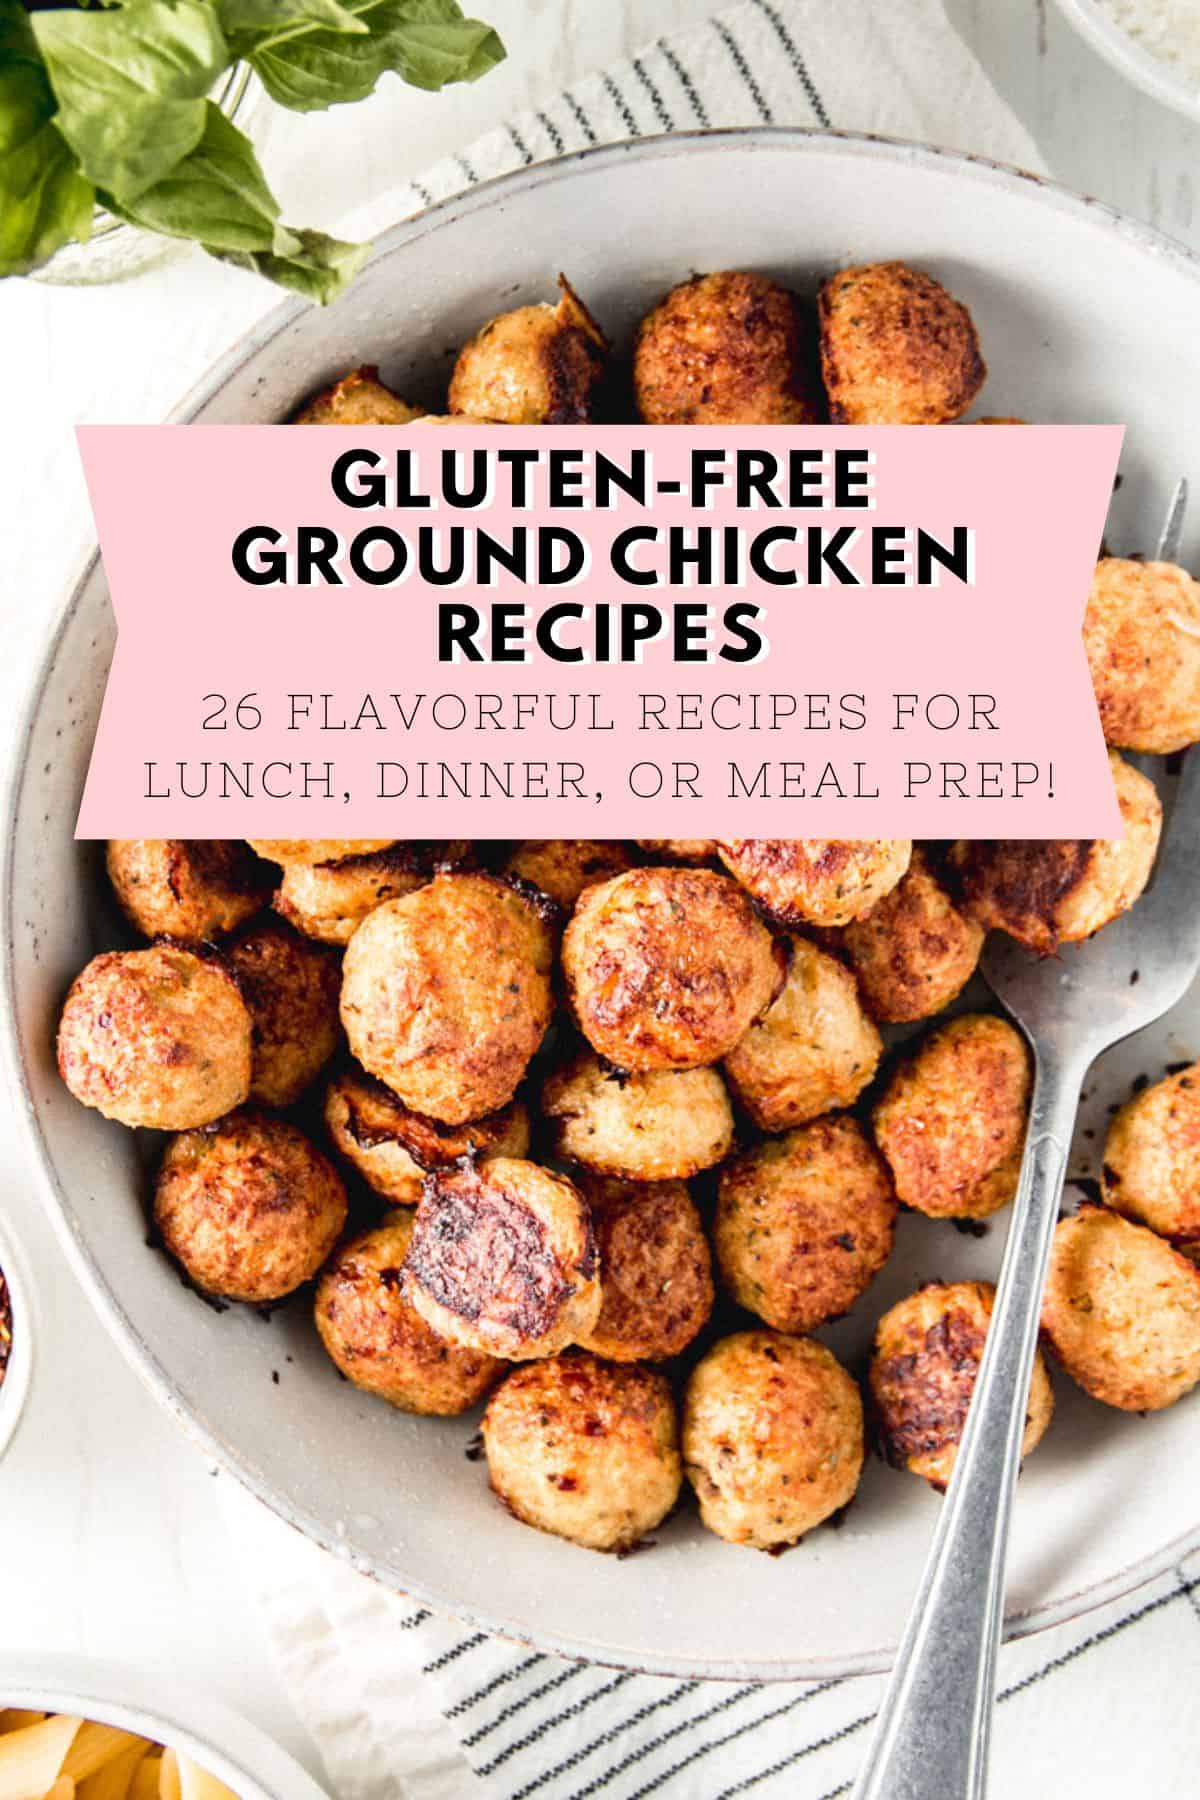 Ground chicken meatballs in a bowl with a large fork. Text overlay: gluten free ground chicken recipes, 26 flavorful recipes for lunch dinner or meal prep.